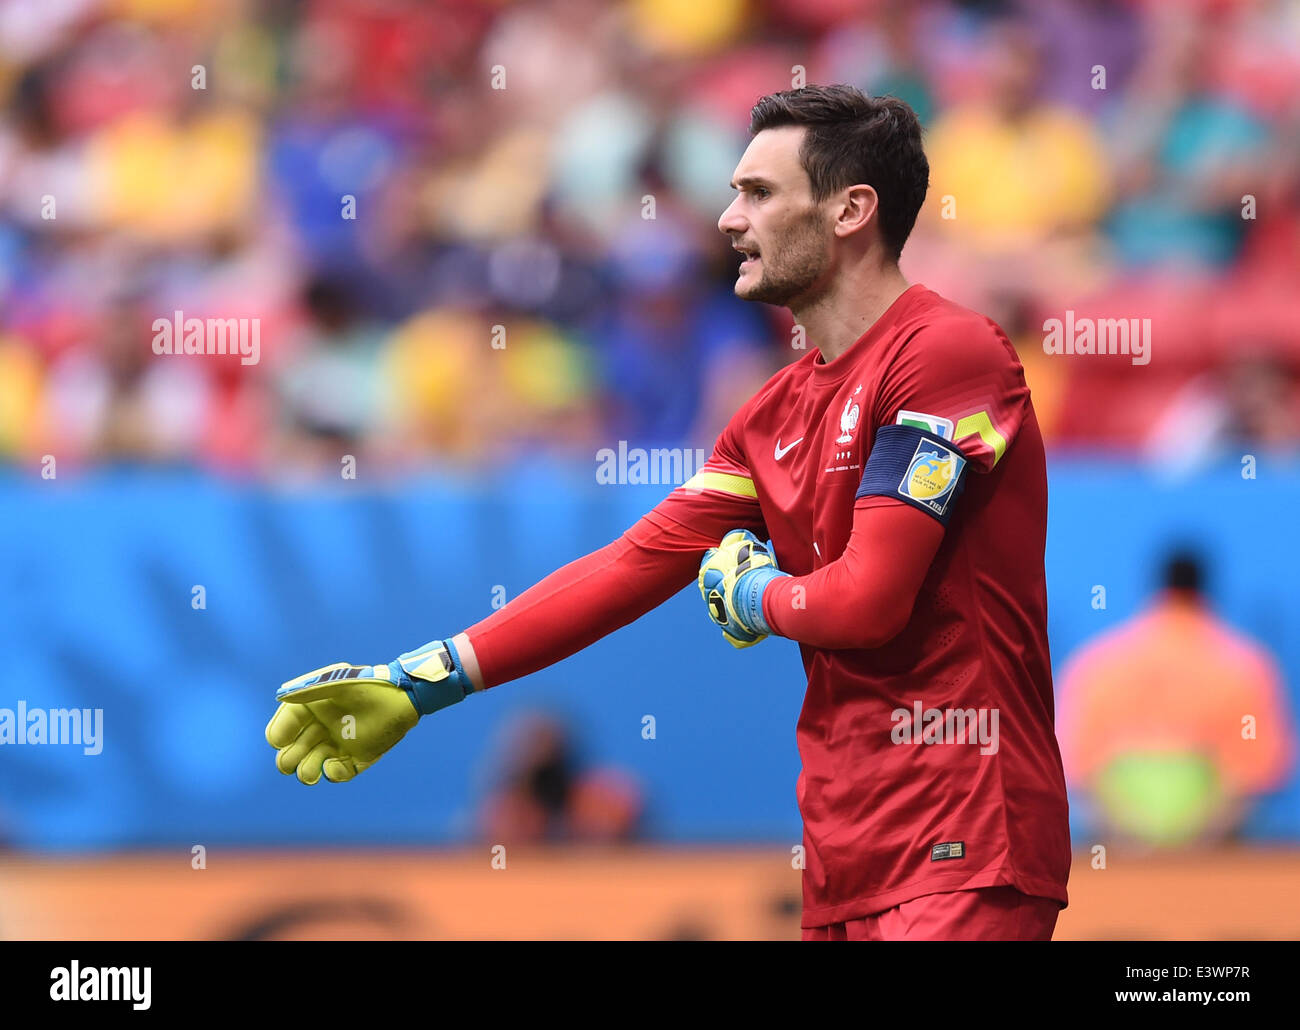 Brasilia, Brazil. 30th June, 2014. Goalkeeper Hugo Lloris of France reacts during the FIFA World Cup 2014 round of 16 match between France and Nigeria at the Estadio National Stadium in Brasilia, Brazil, on 30 June 2014. Credit:  dpa picture alliance/Alamy Live News Stock Photo